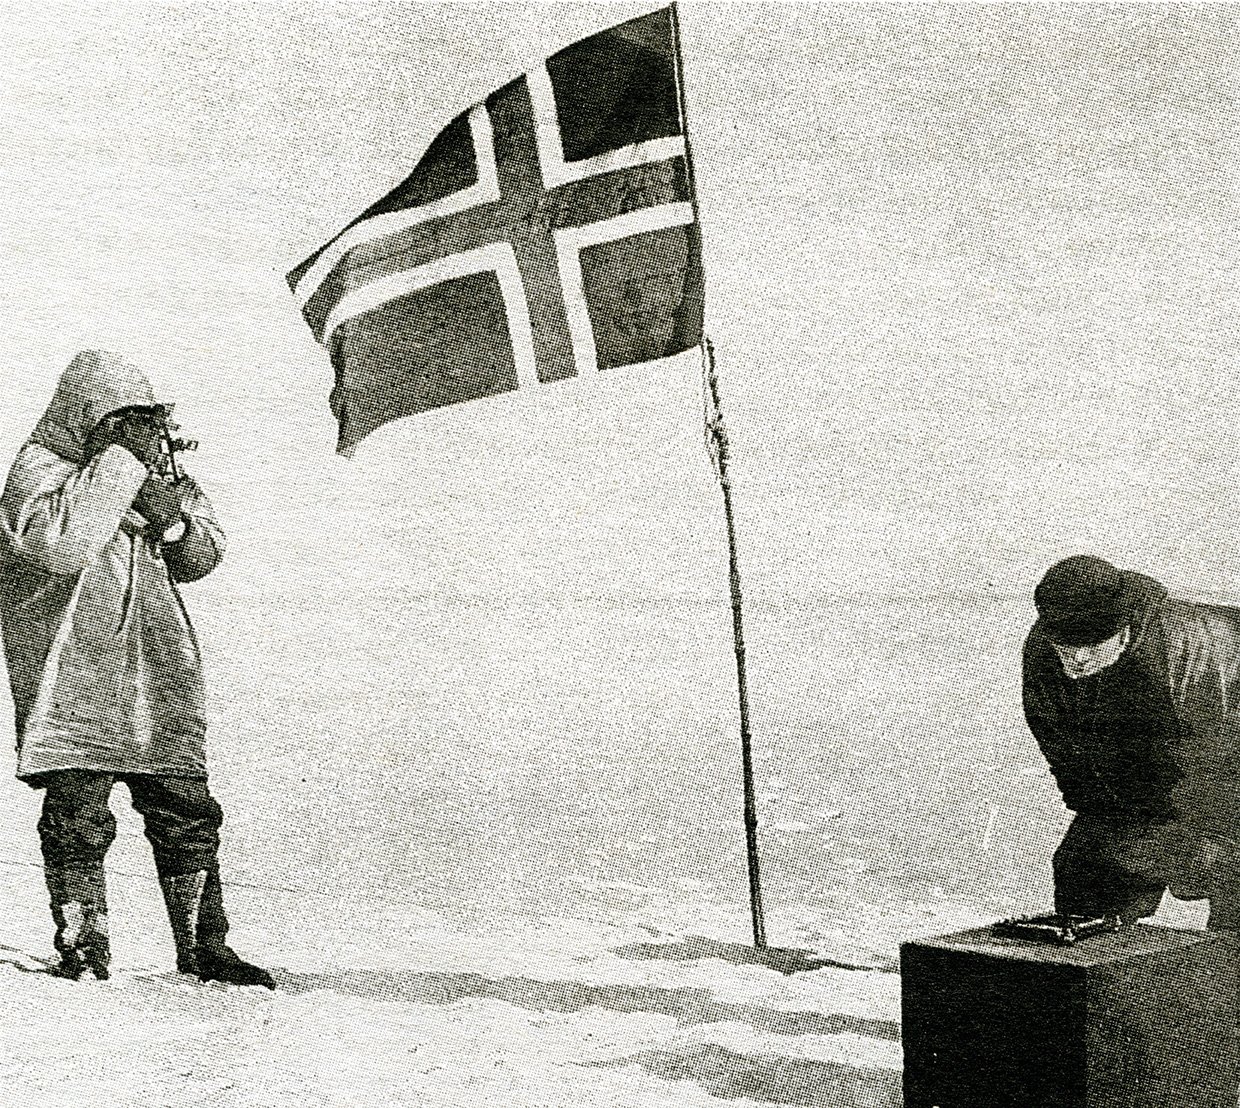 South Pole after fierce competition from Britain's Robert Falcon Scott, who arrived 35 days after Amundsen